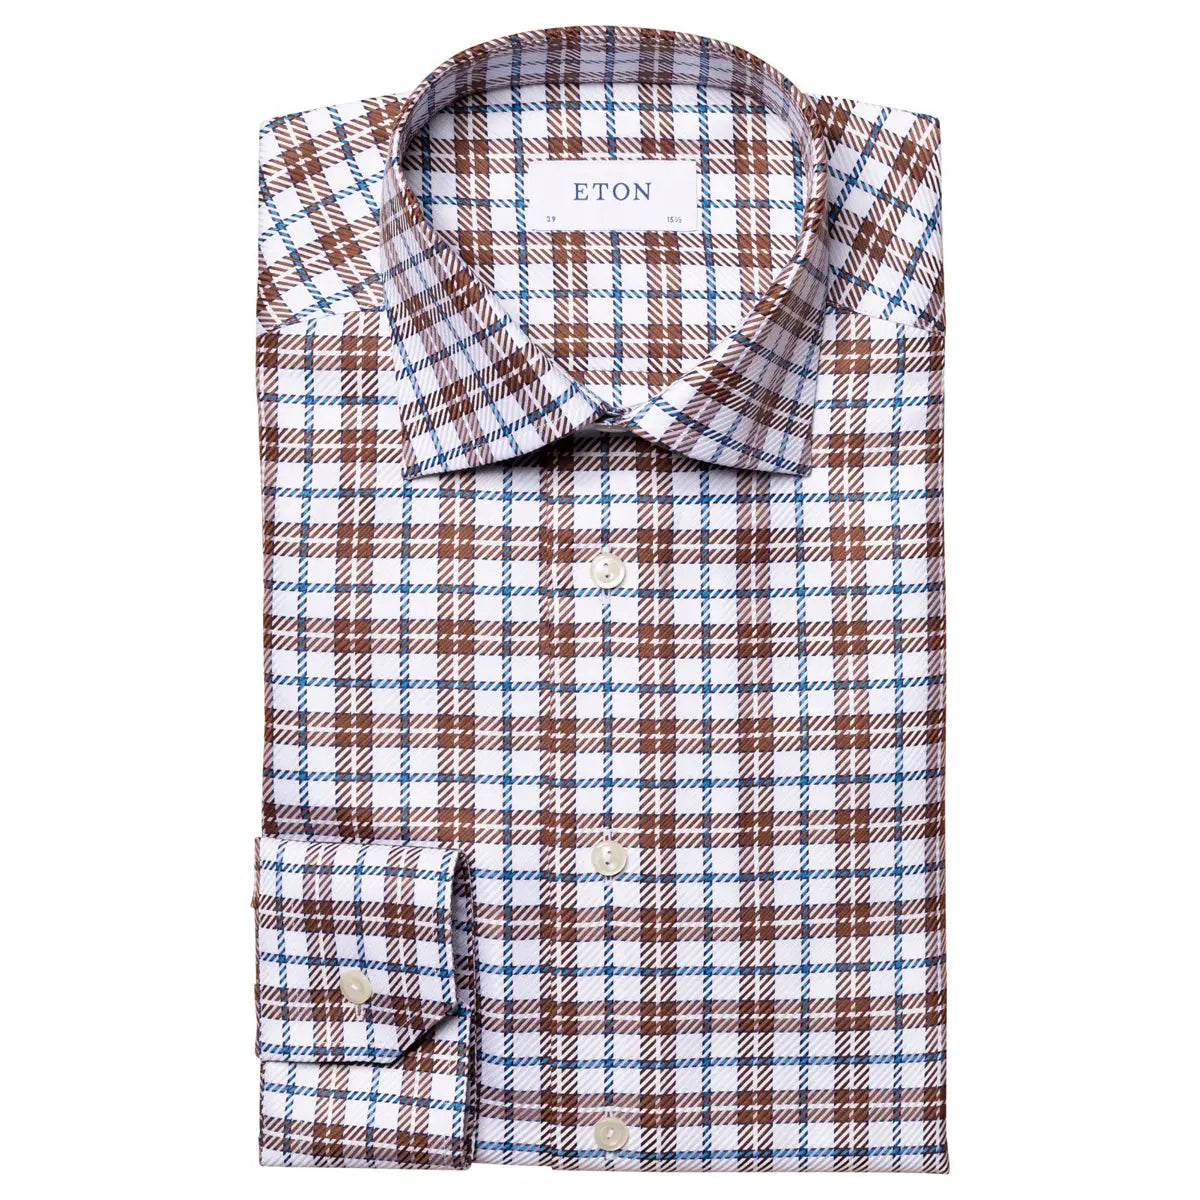 Off-White & Brown Checked King Twill Contemporary Fit Shirt  Eton   